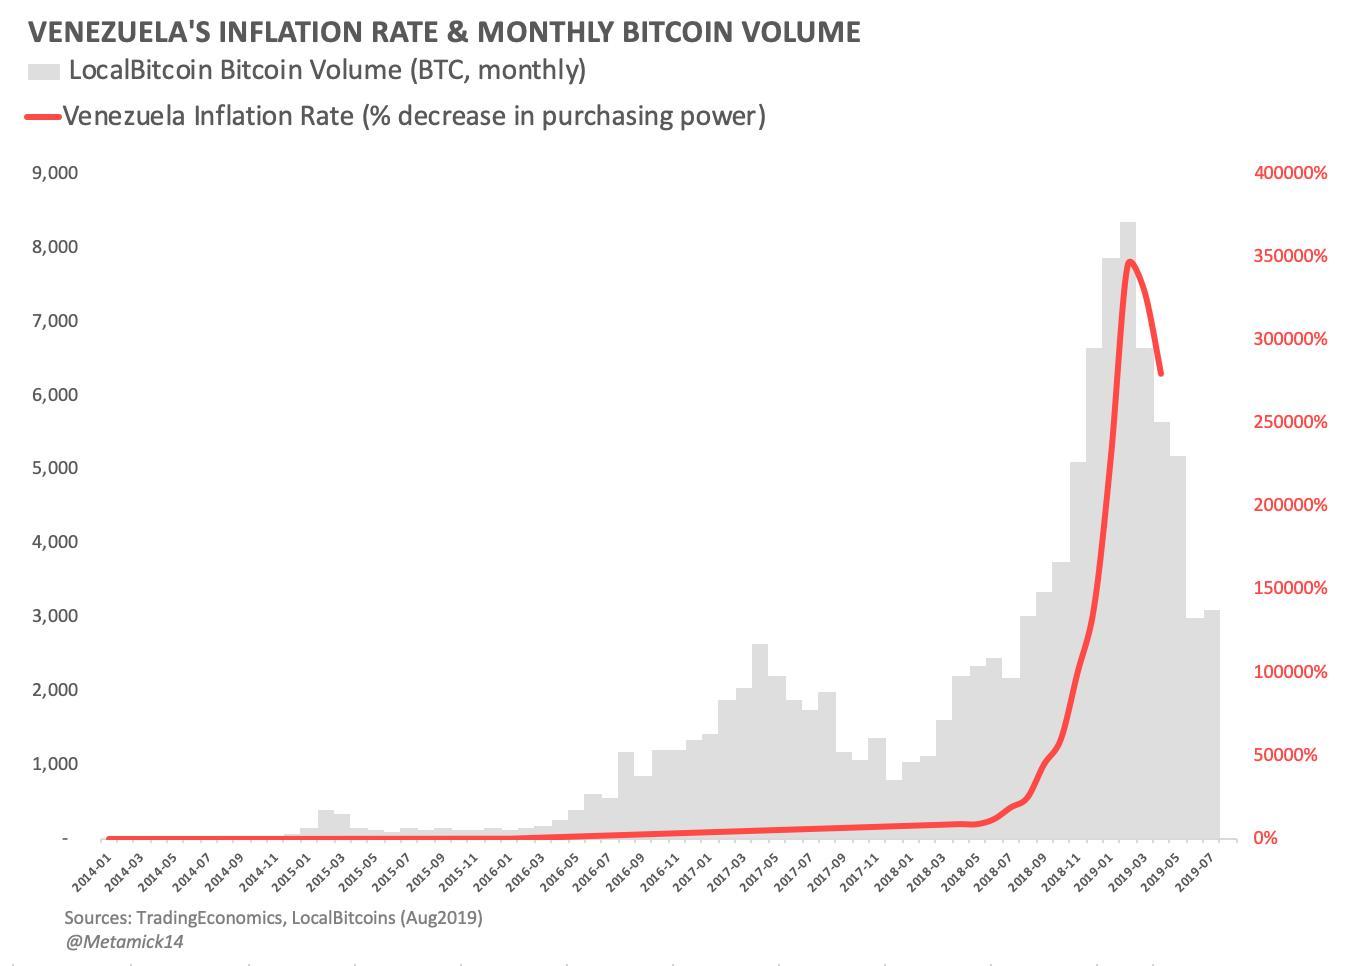 Casual Relationship: Bitcoin Trading Volume In Venezuela Is Keeping Up With The Inflation Rate